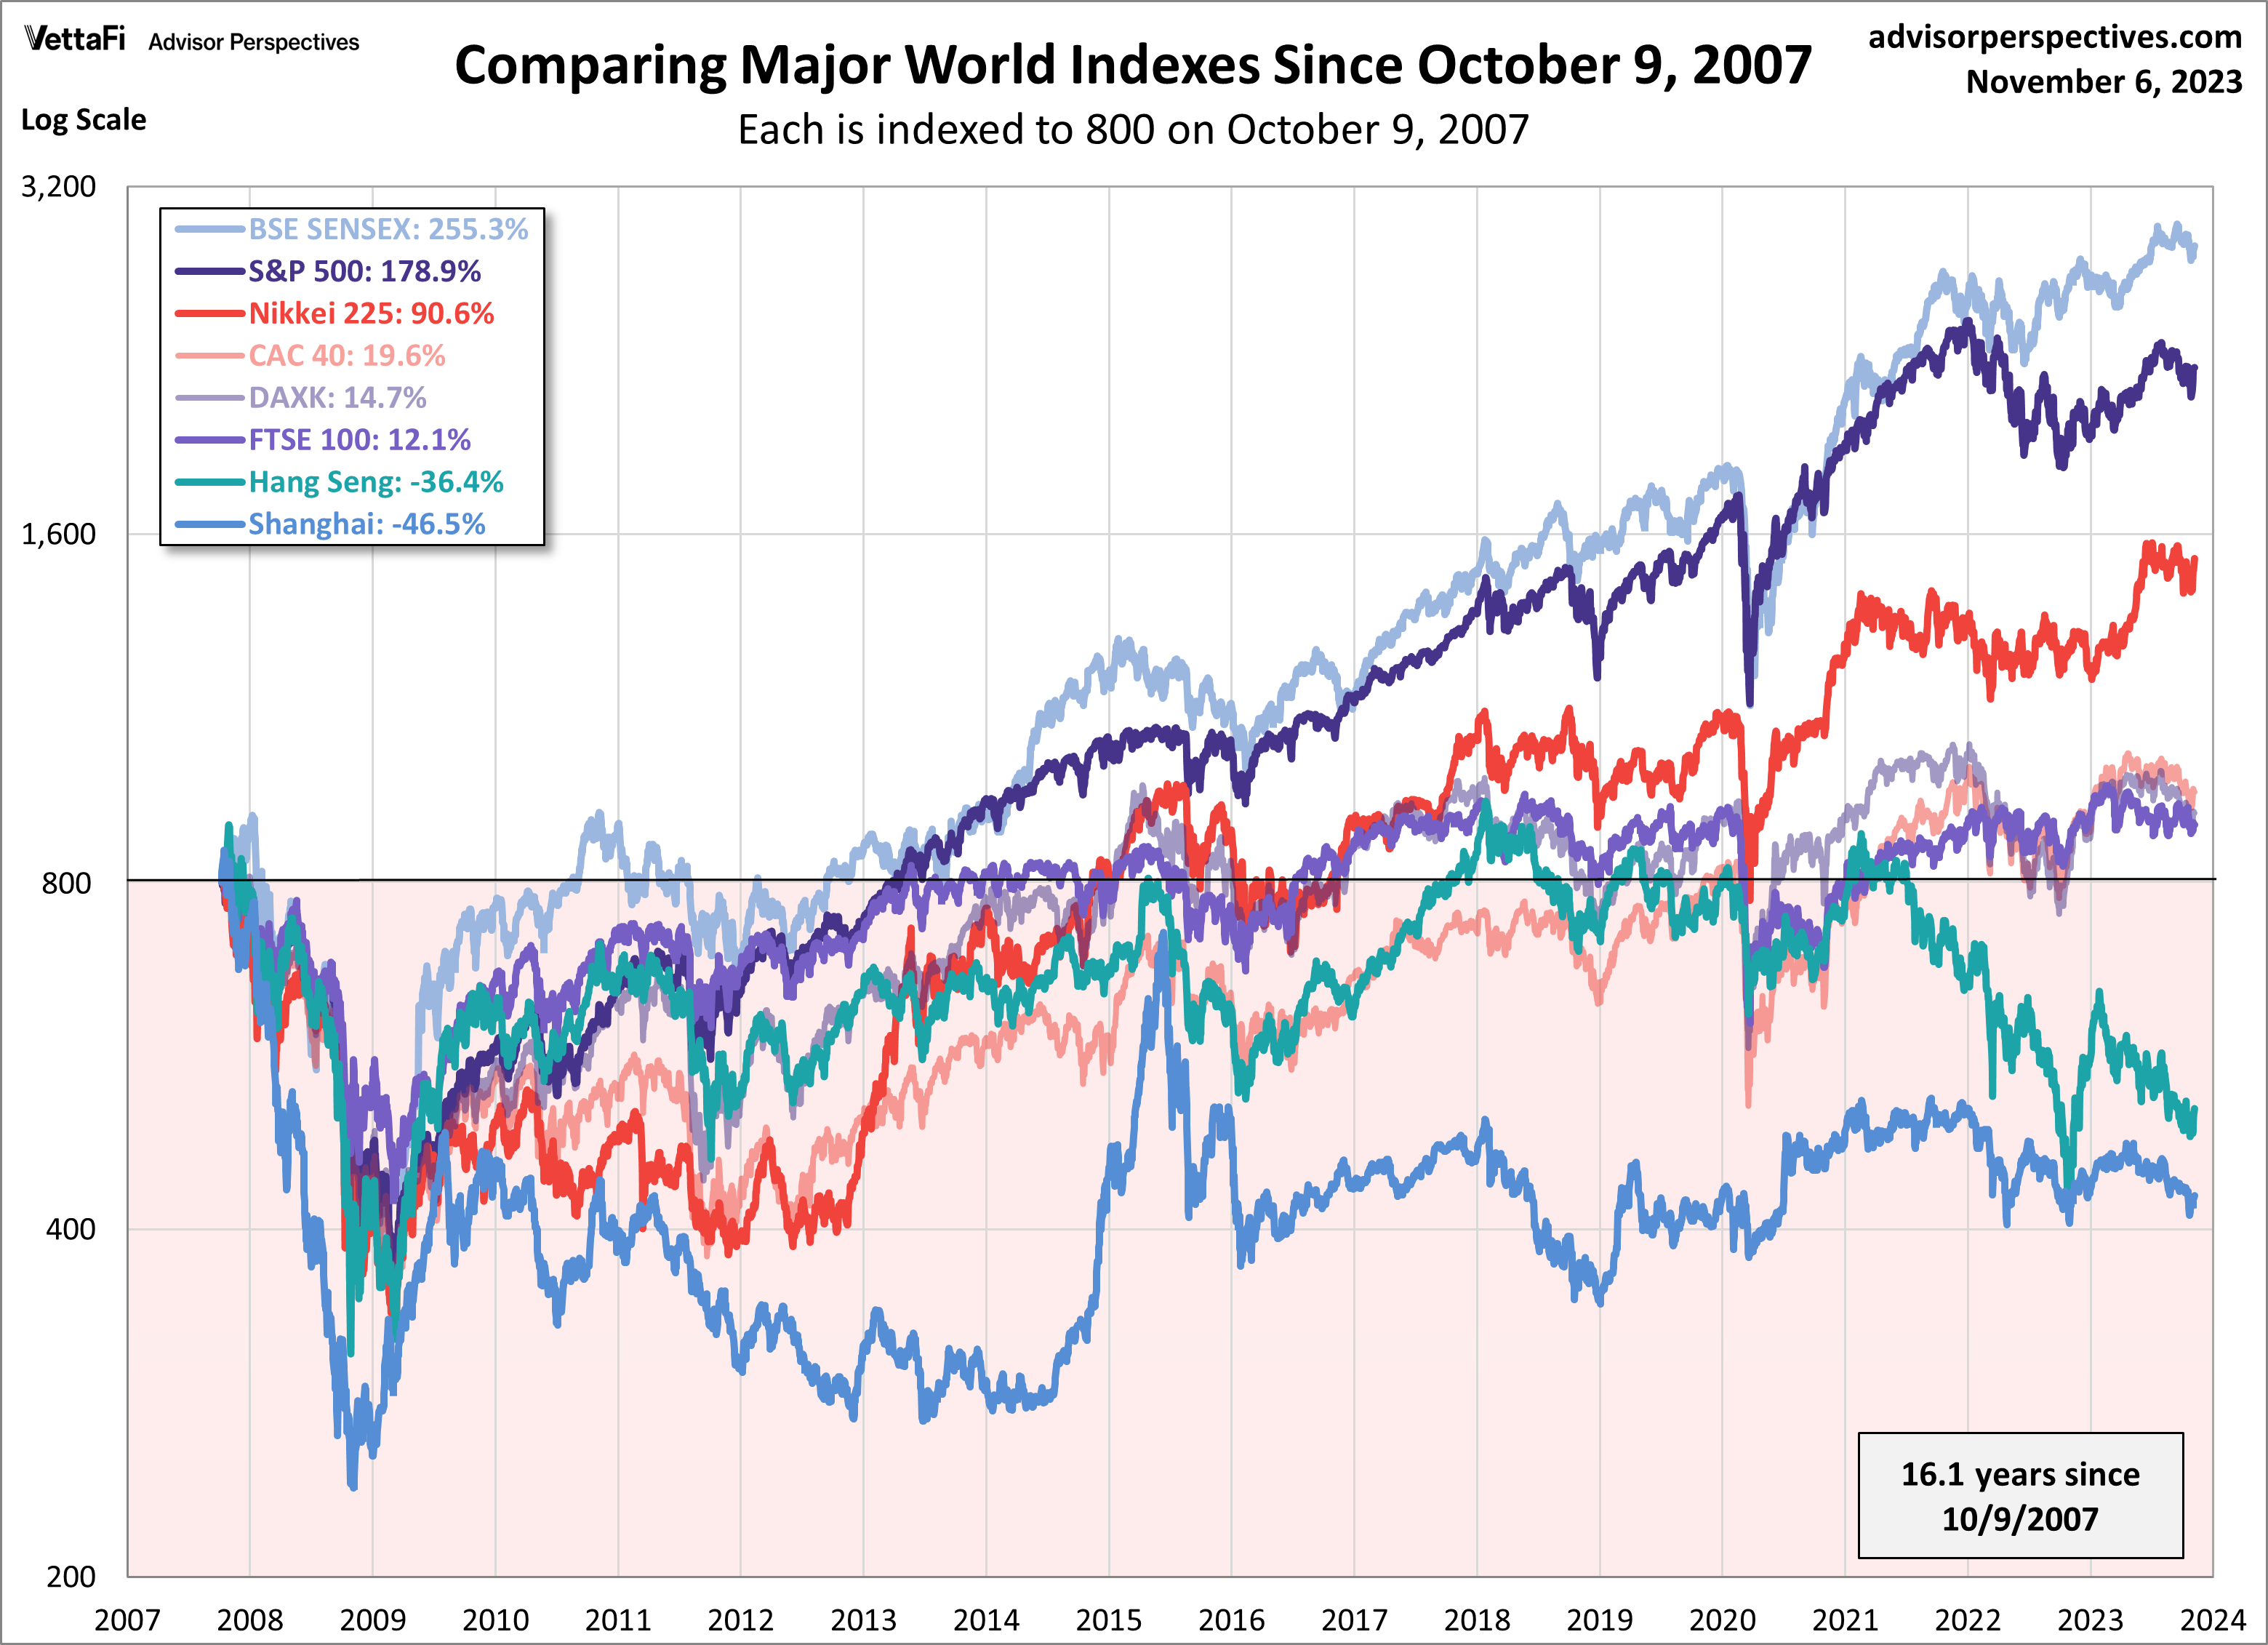 Comparing Major World Indexes since 10/9/2007